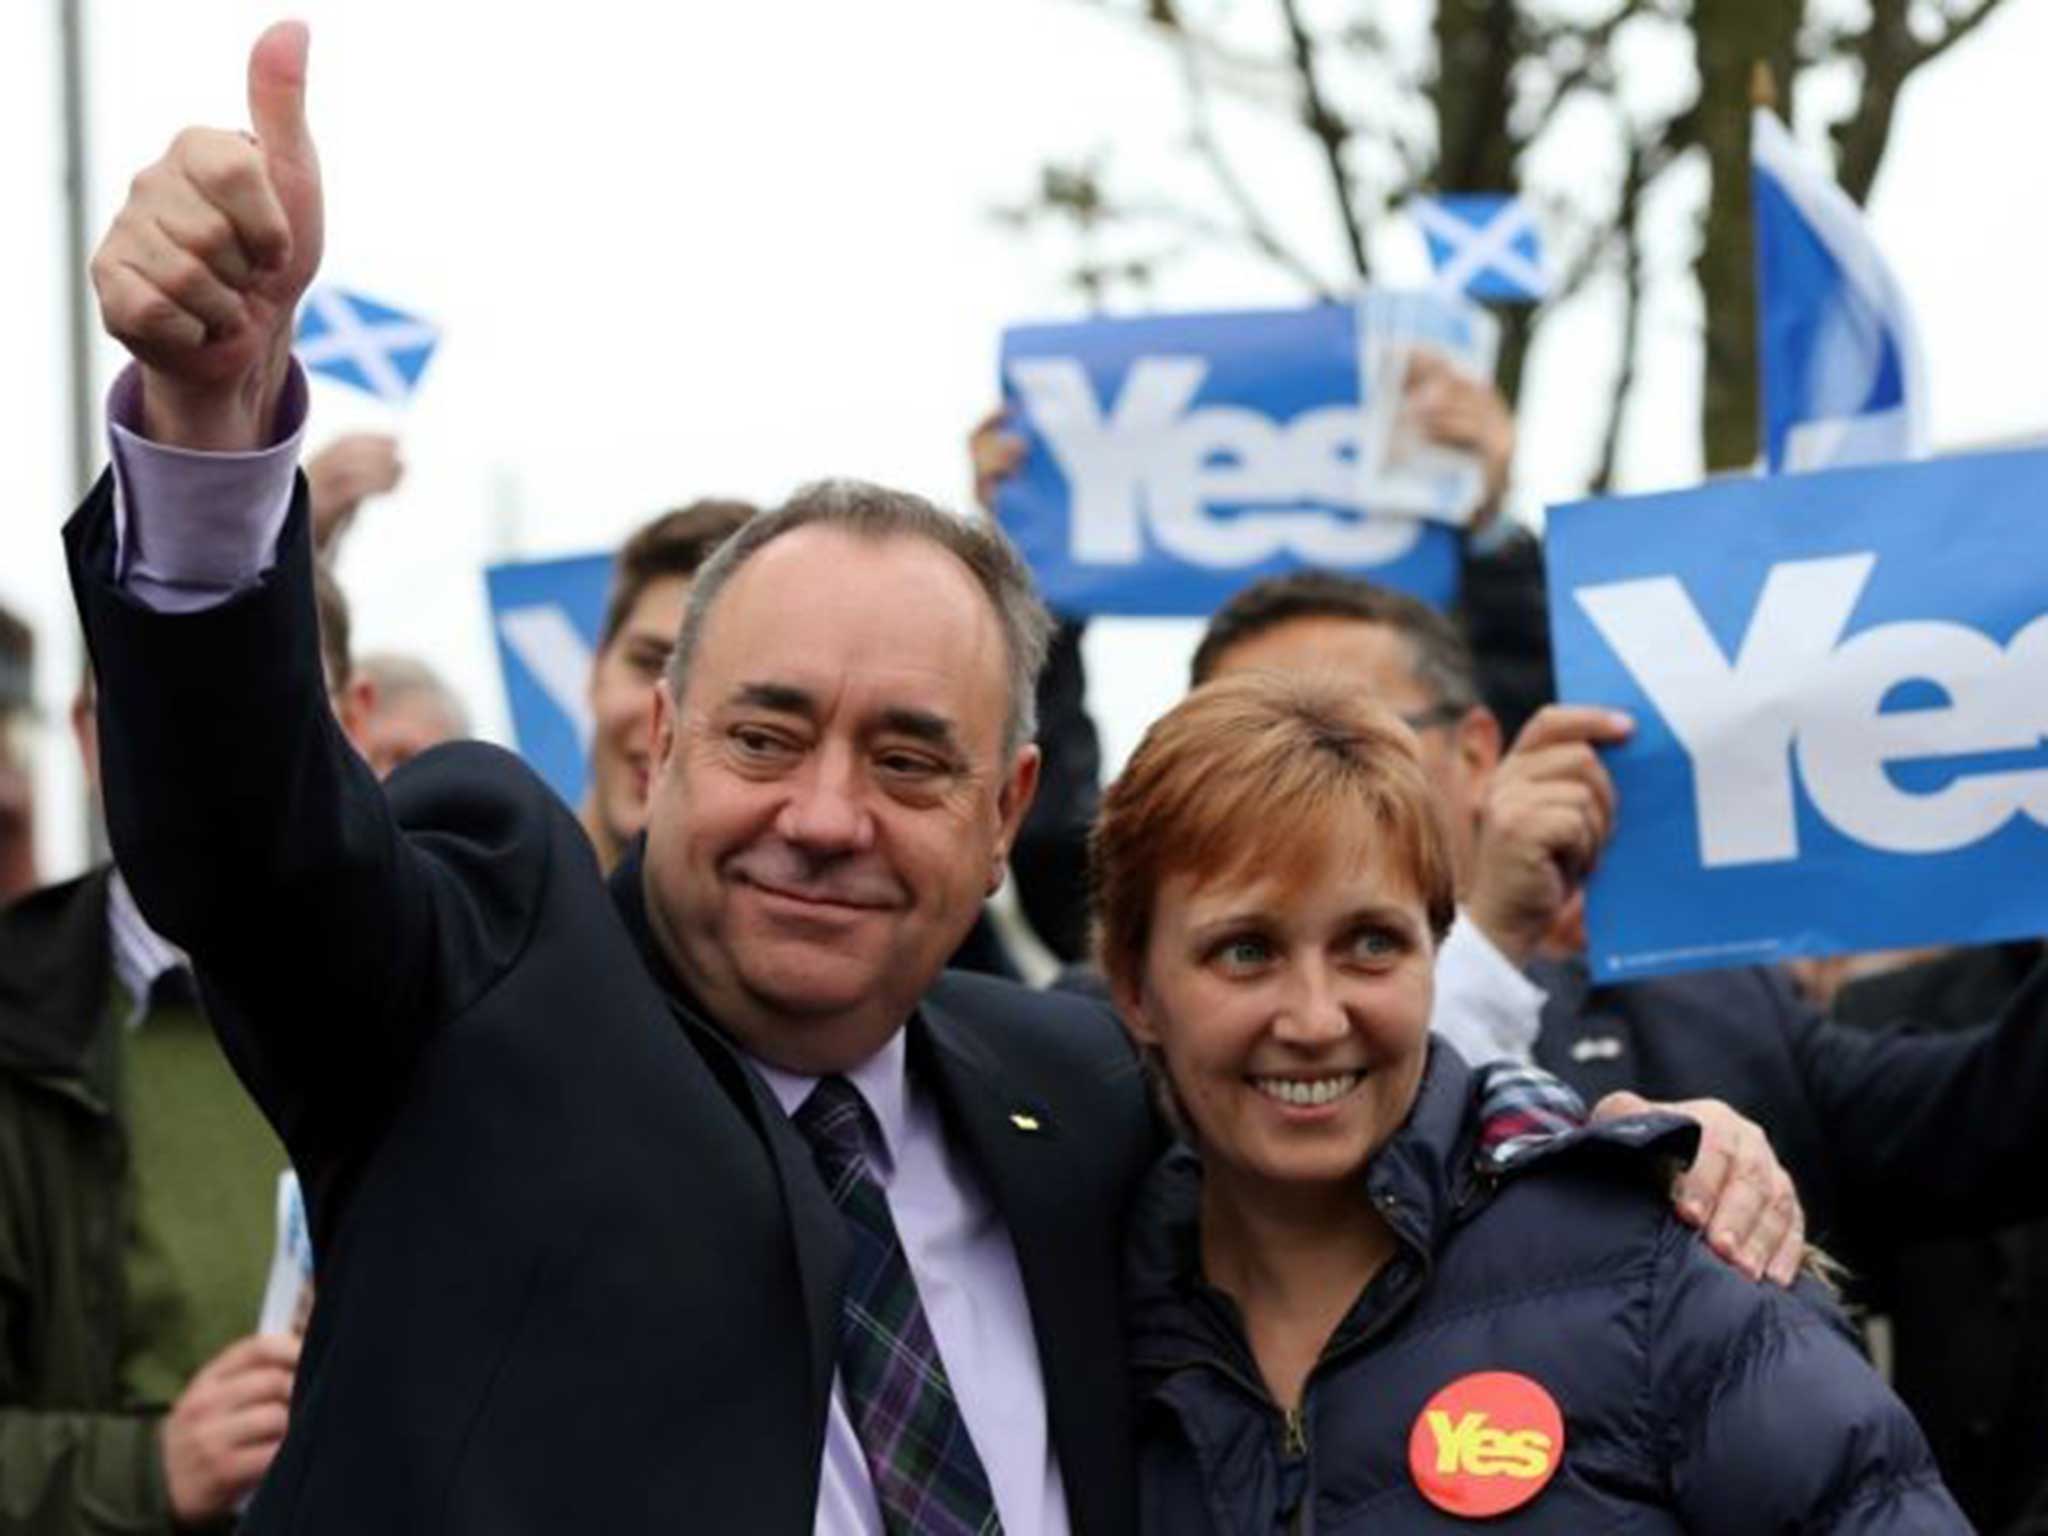 Salmond with a Yes support earlier today